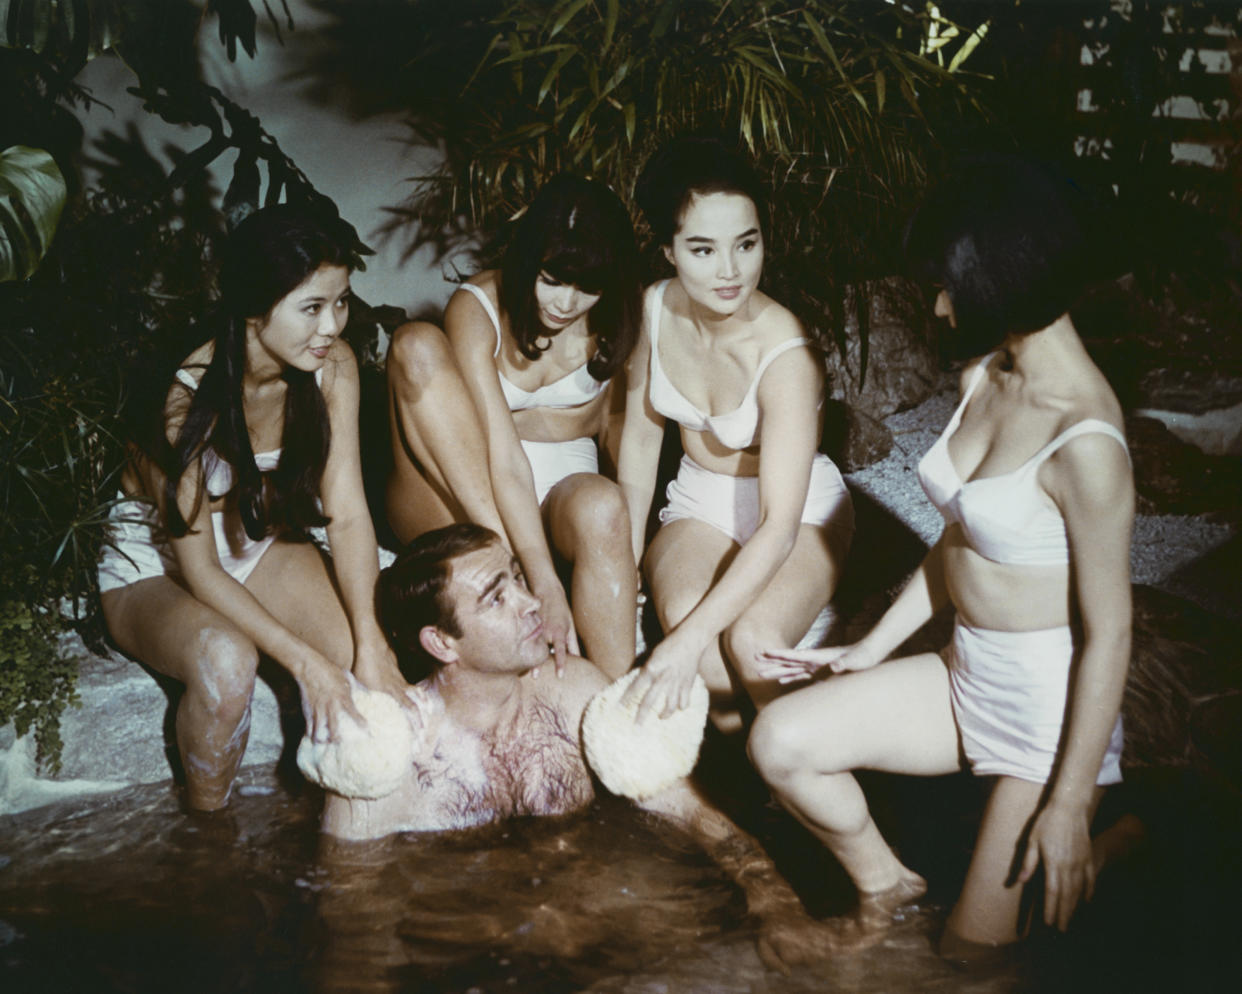 Scottish actor Sean Connery as James Bond enjoys a Japanese onsen or bath in the film 'You Only Live Twice', 1967. (Photo by Silver Screen Collection/Getty Images)